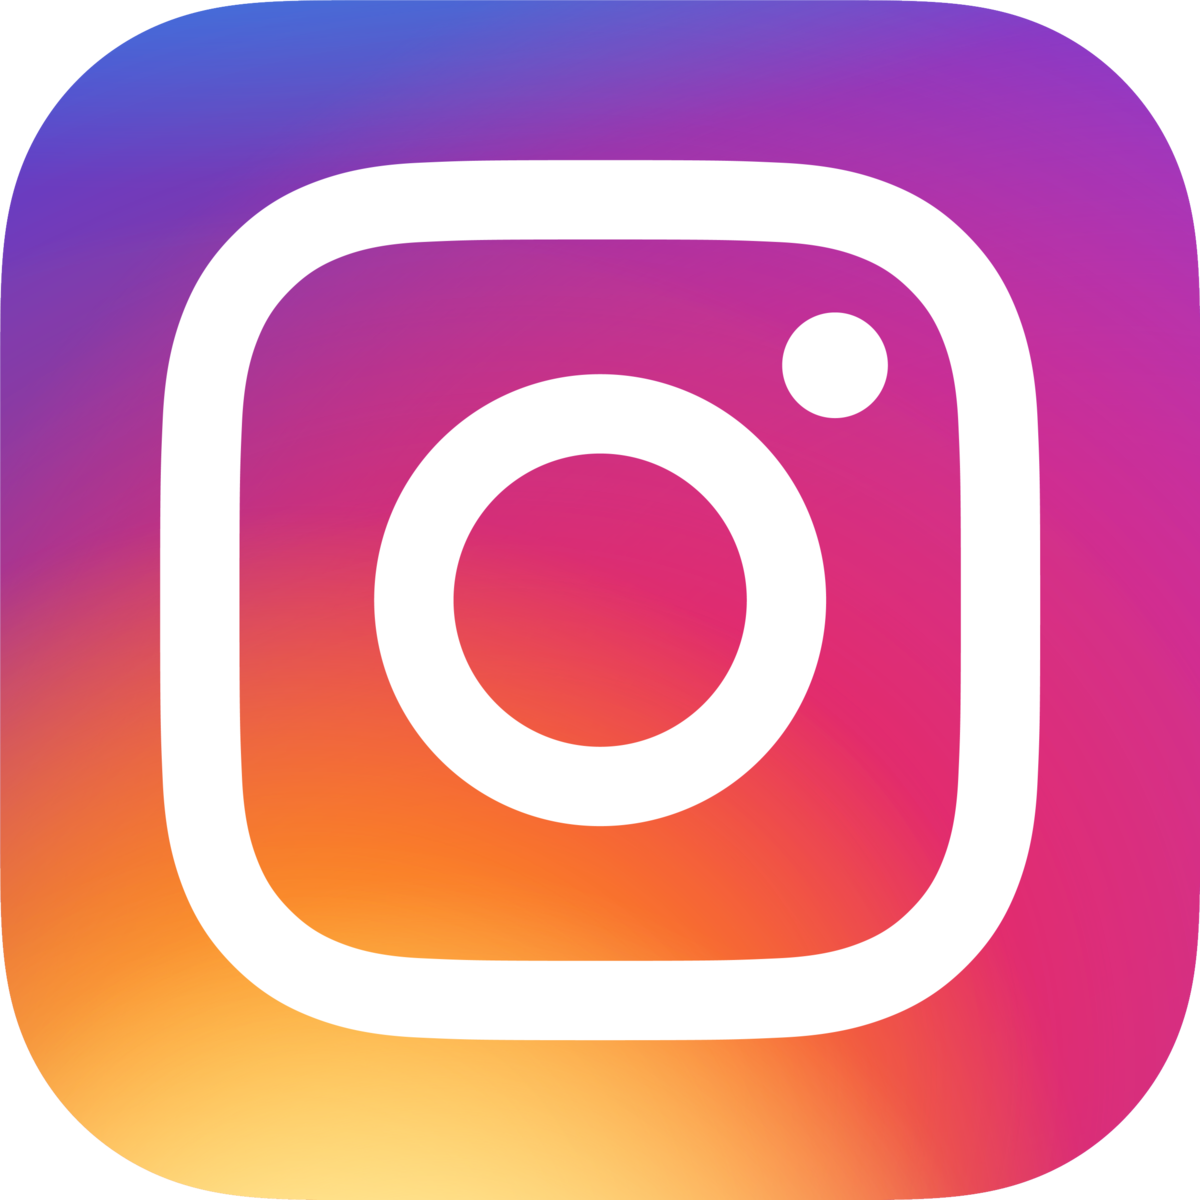 click here for HPL Instagram page